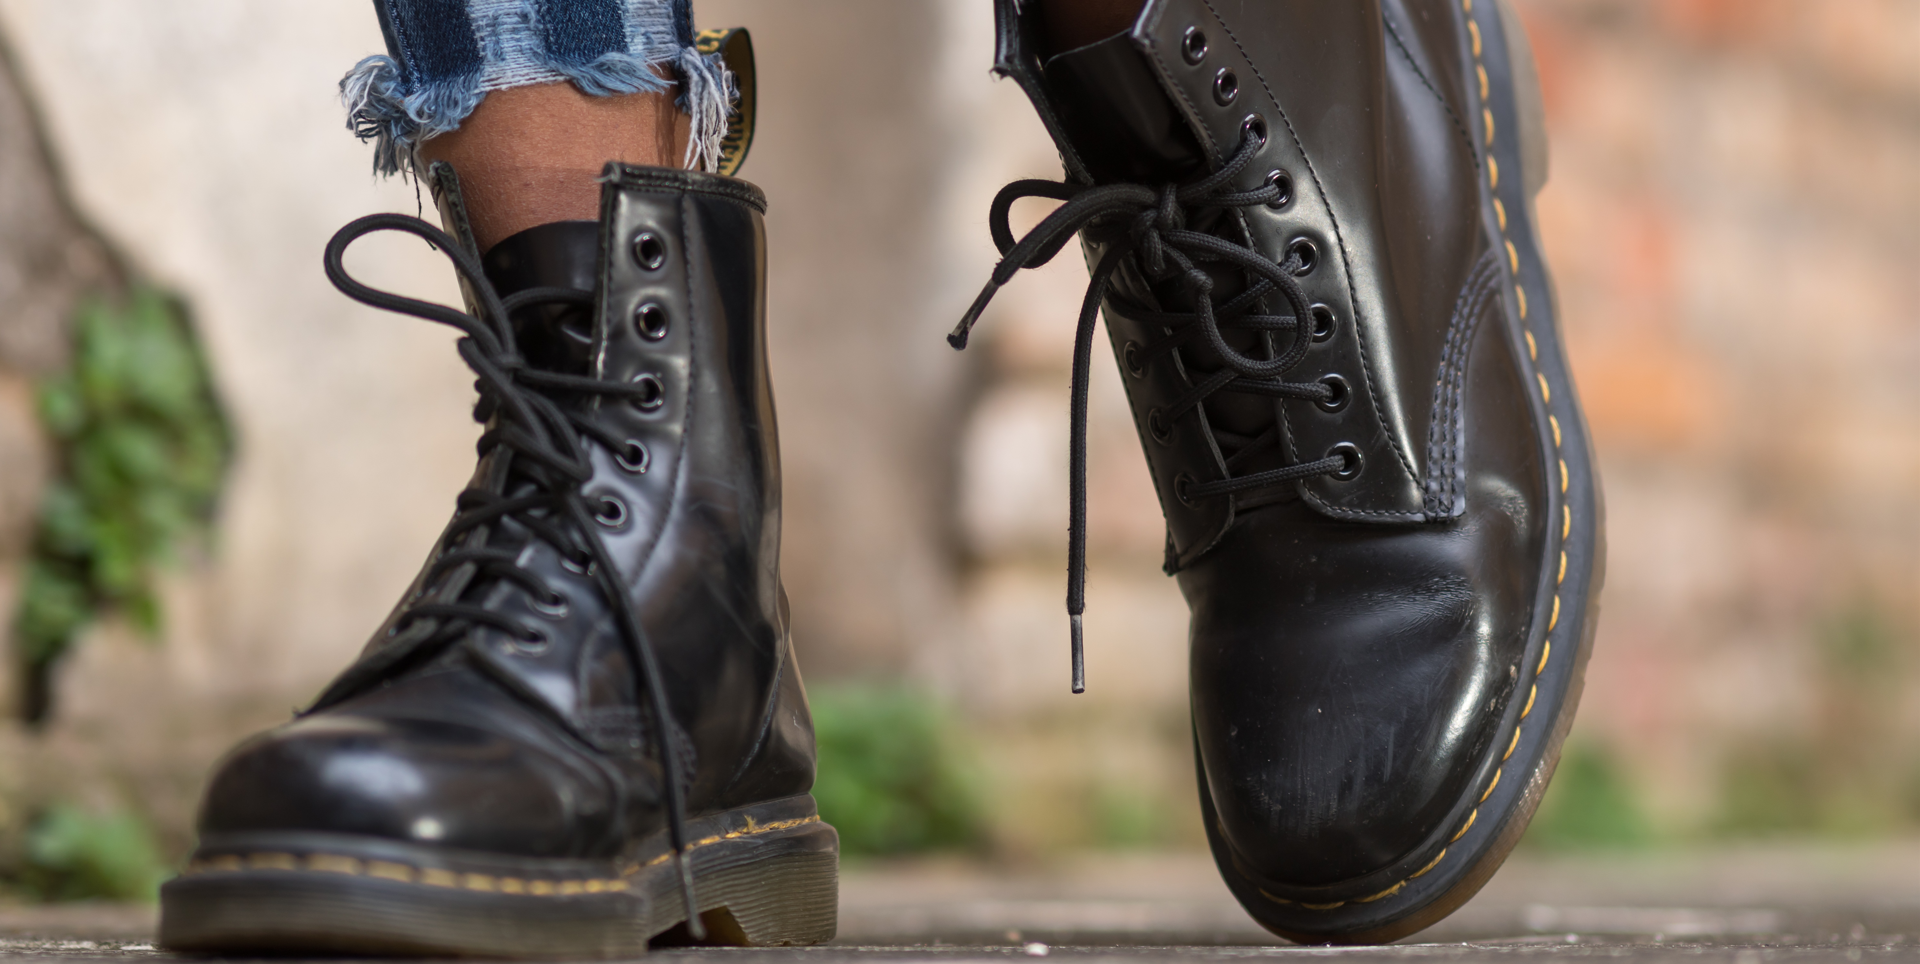 Best Doc Martens For Wide Feet: 4 Options For The Edgy Girls